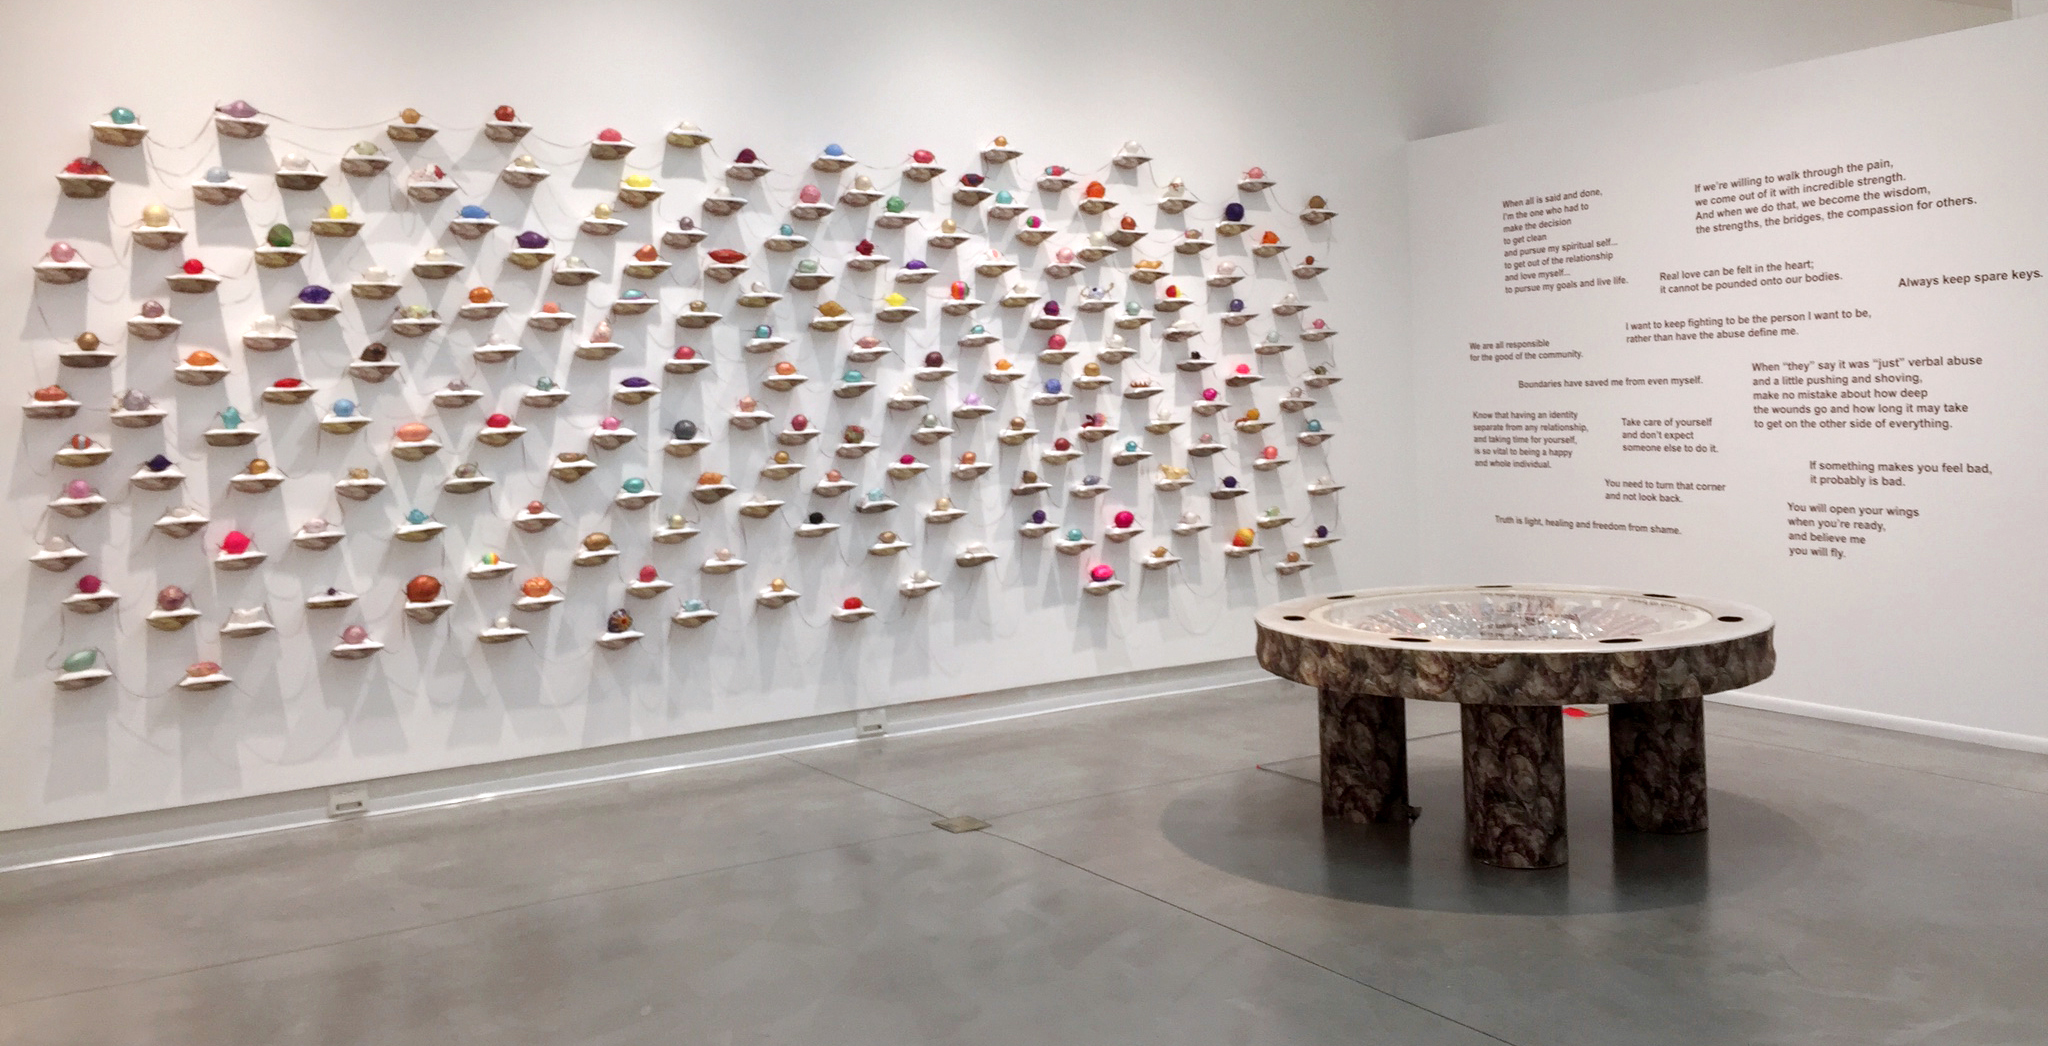 Pearls of Wisdom installed  at Orange Coast College gallery in 2017 for the exhibit, Kim Abeles: ˌterə ˈfɜːrmə